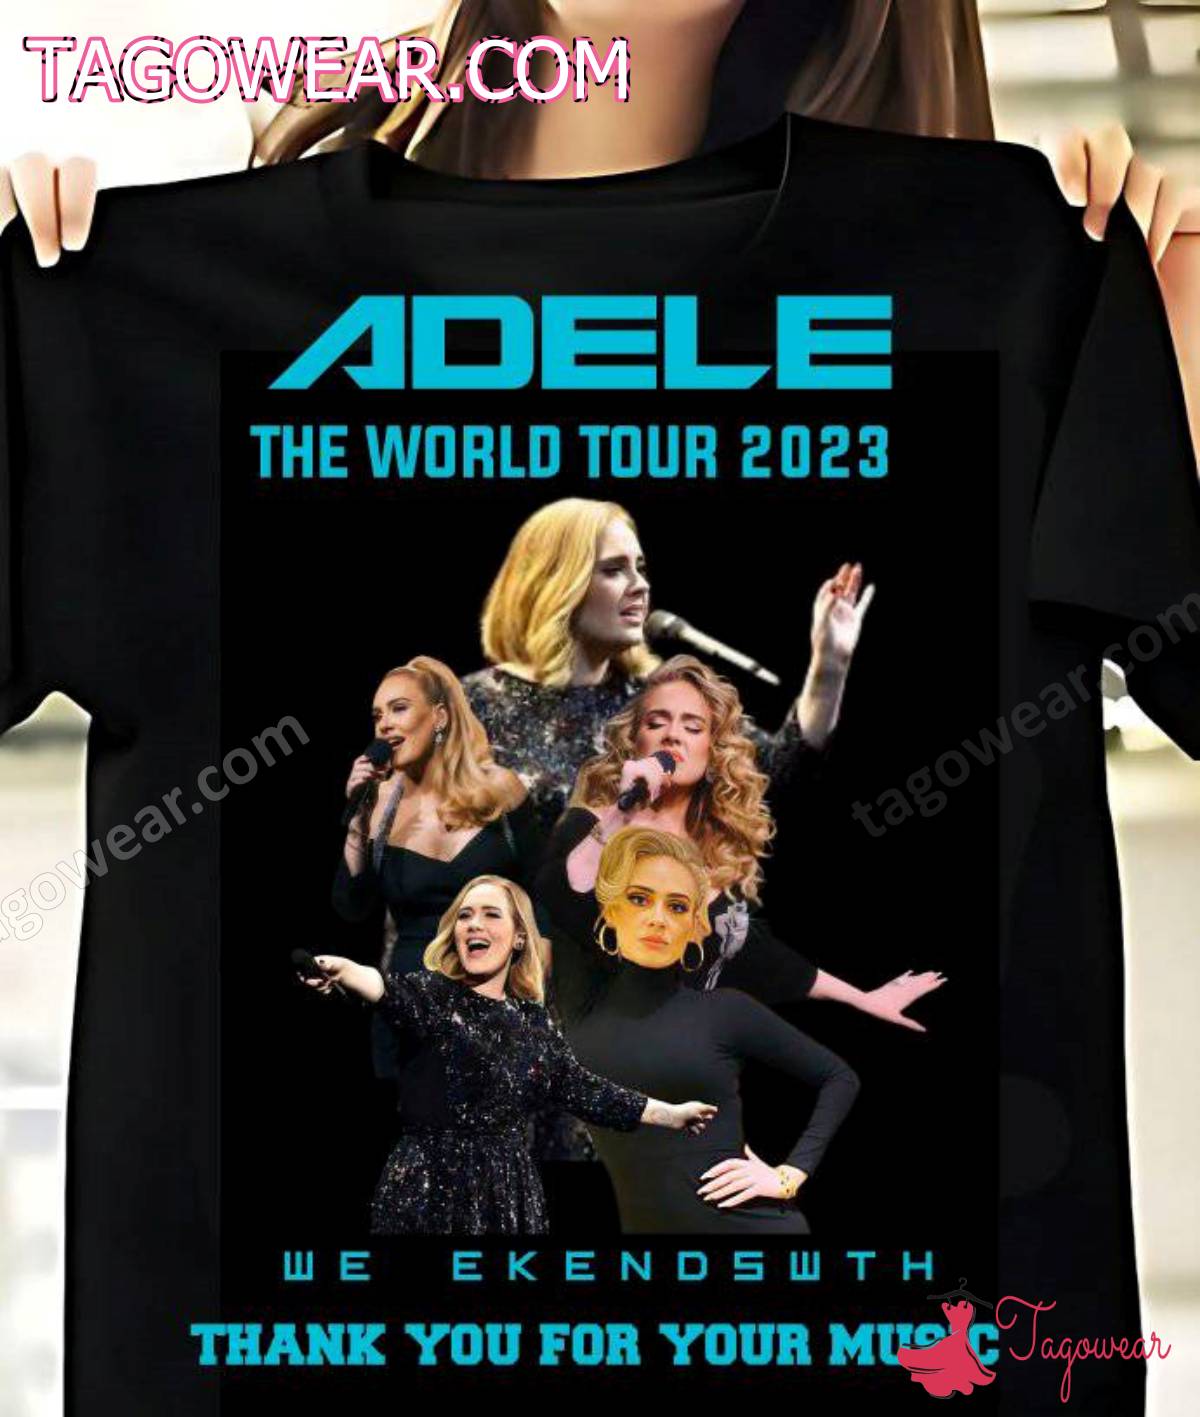 Adele The World Tour 2023 Weekends With Thank You For Your Music Shirt